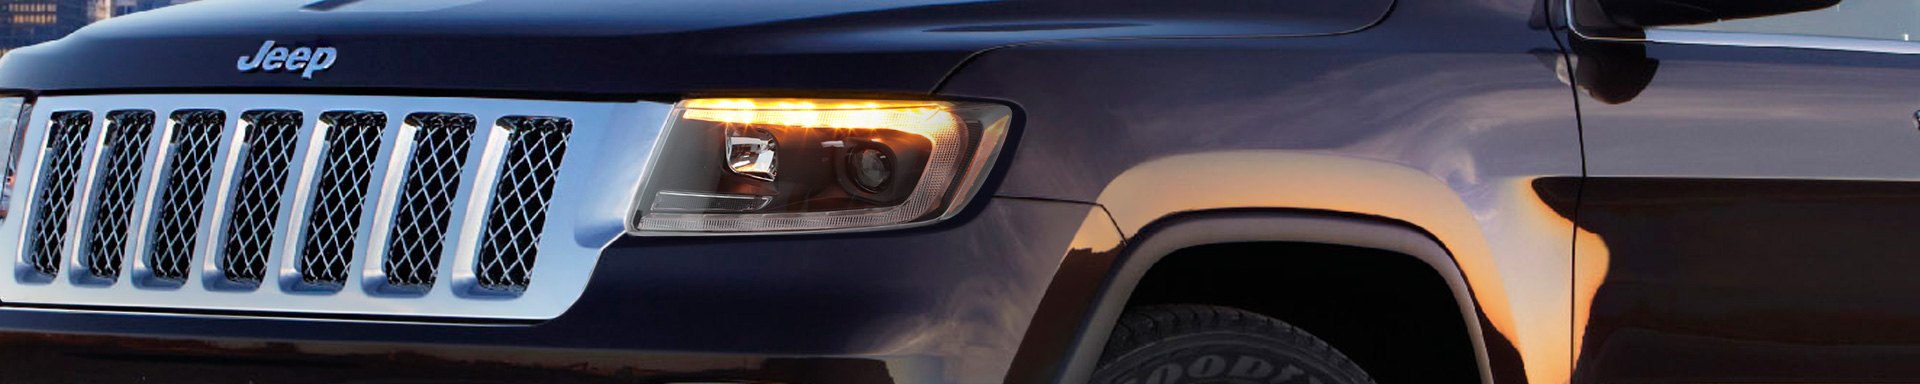 First Look At All-New Spyder LED Headlights For 2011-2013 Jeep Grand Cherokee